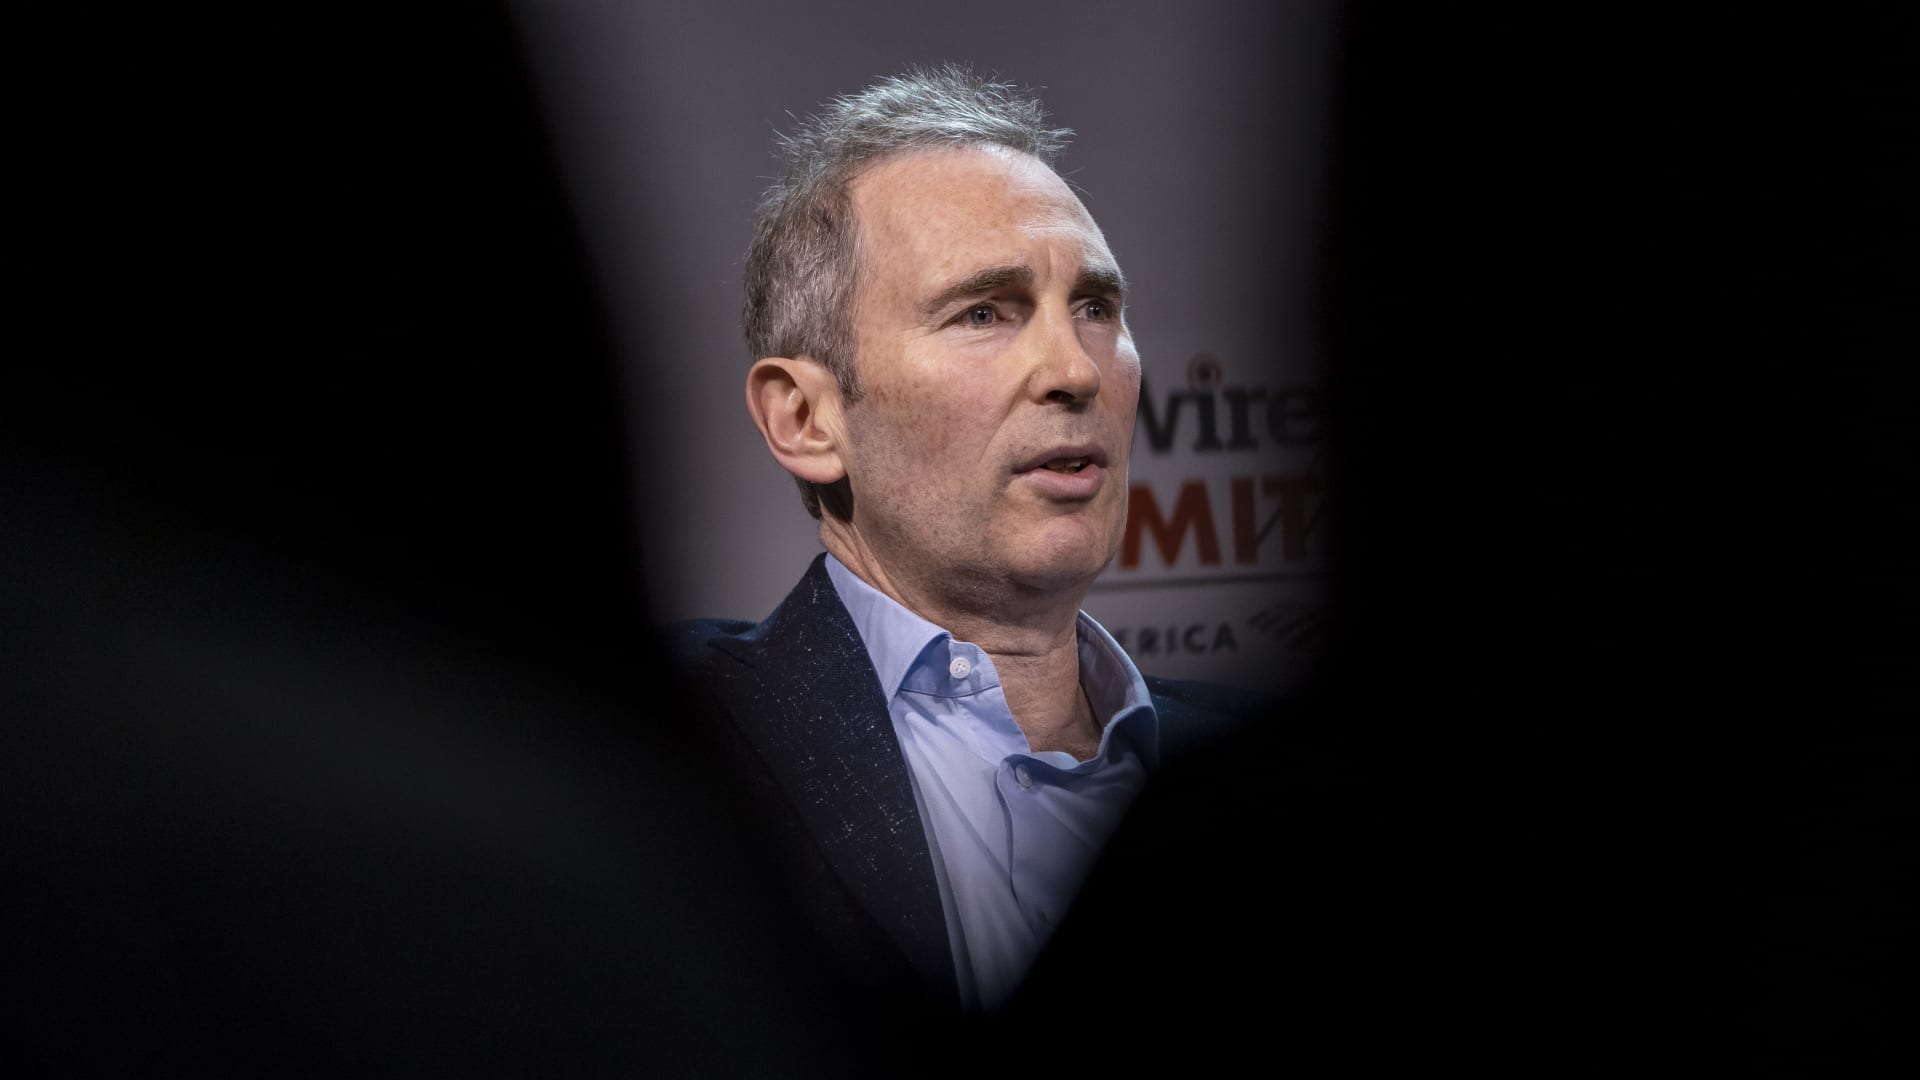 Amazon CEO Andy Jassy says he's focused on returning to 'healthy' level of profitability